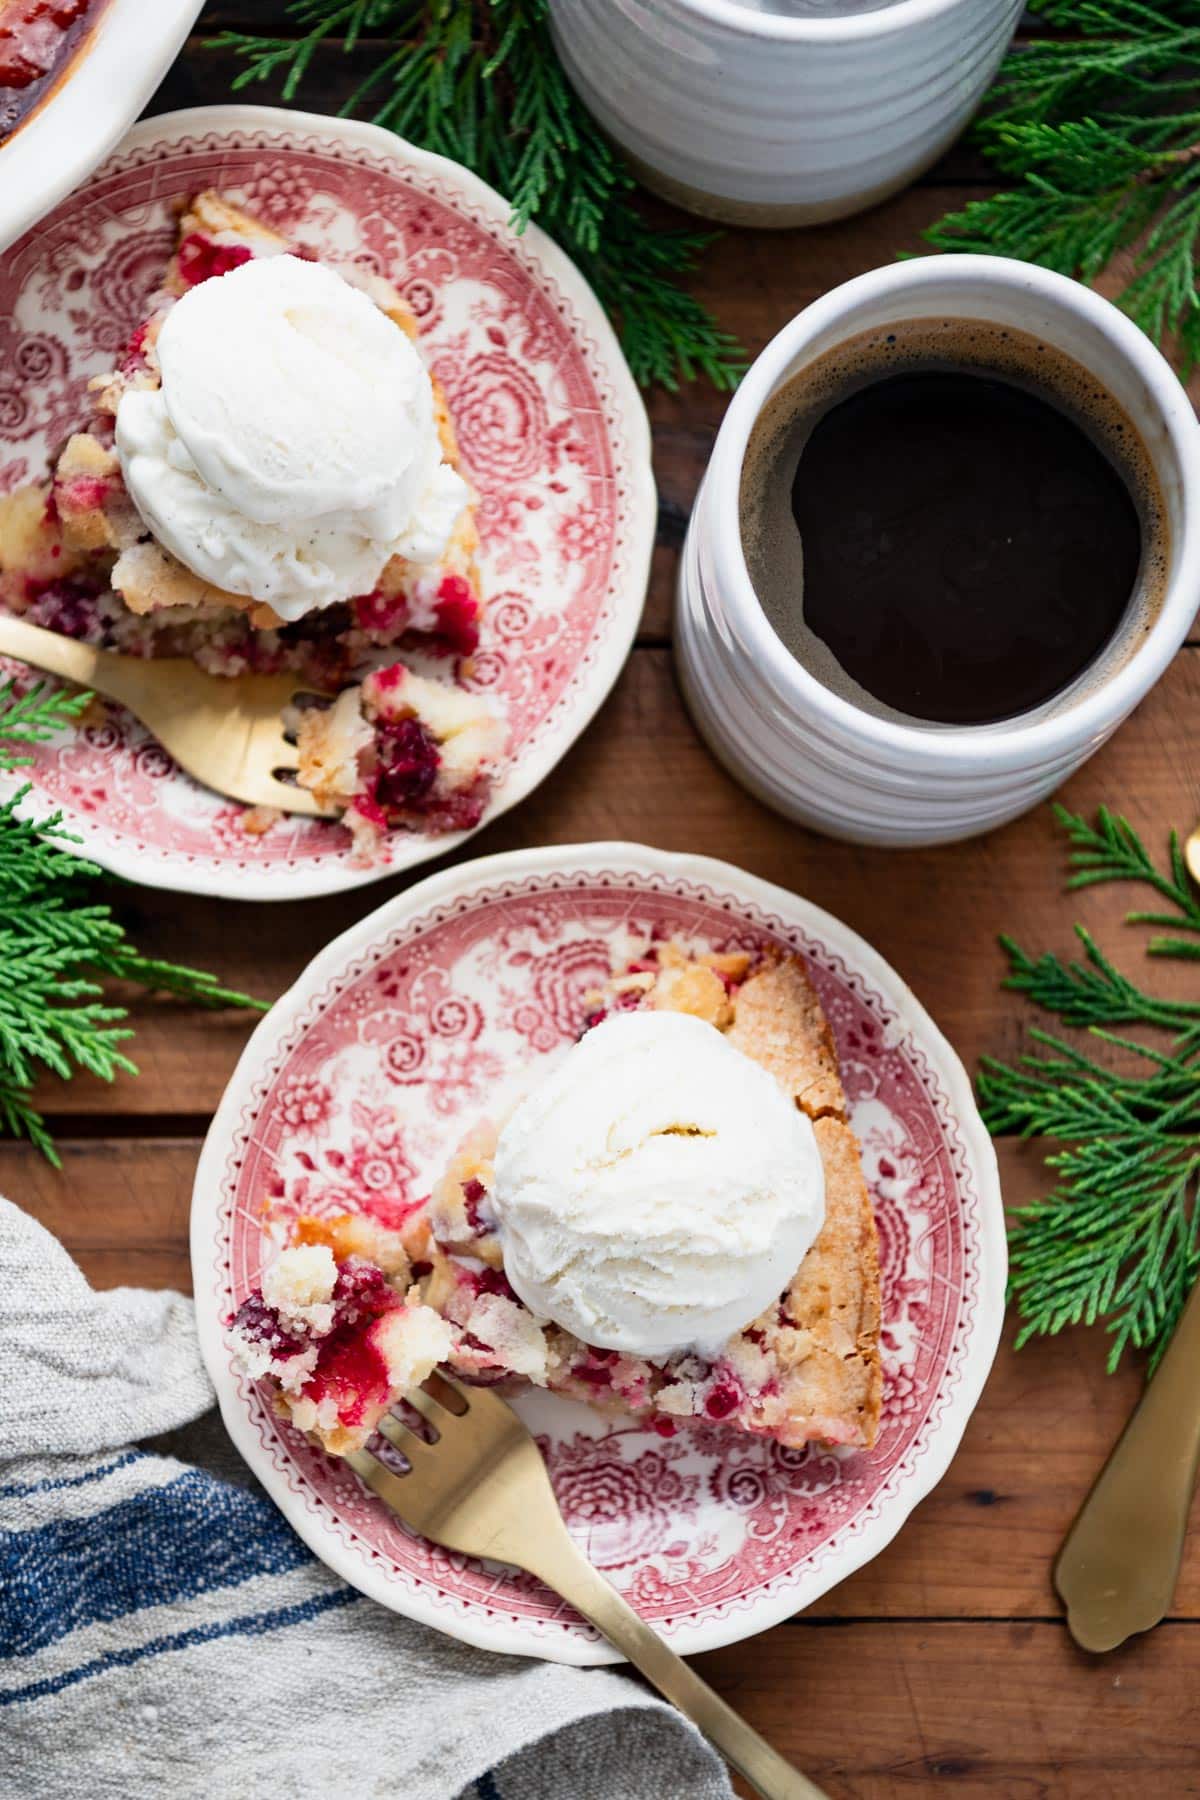 Fresh cranberry pie sliced and served on red and white plates.